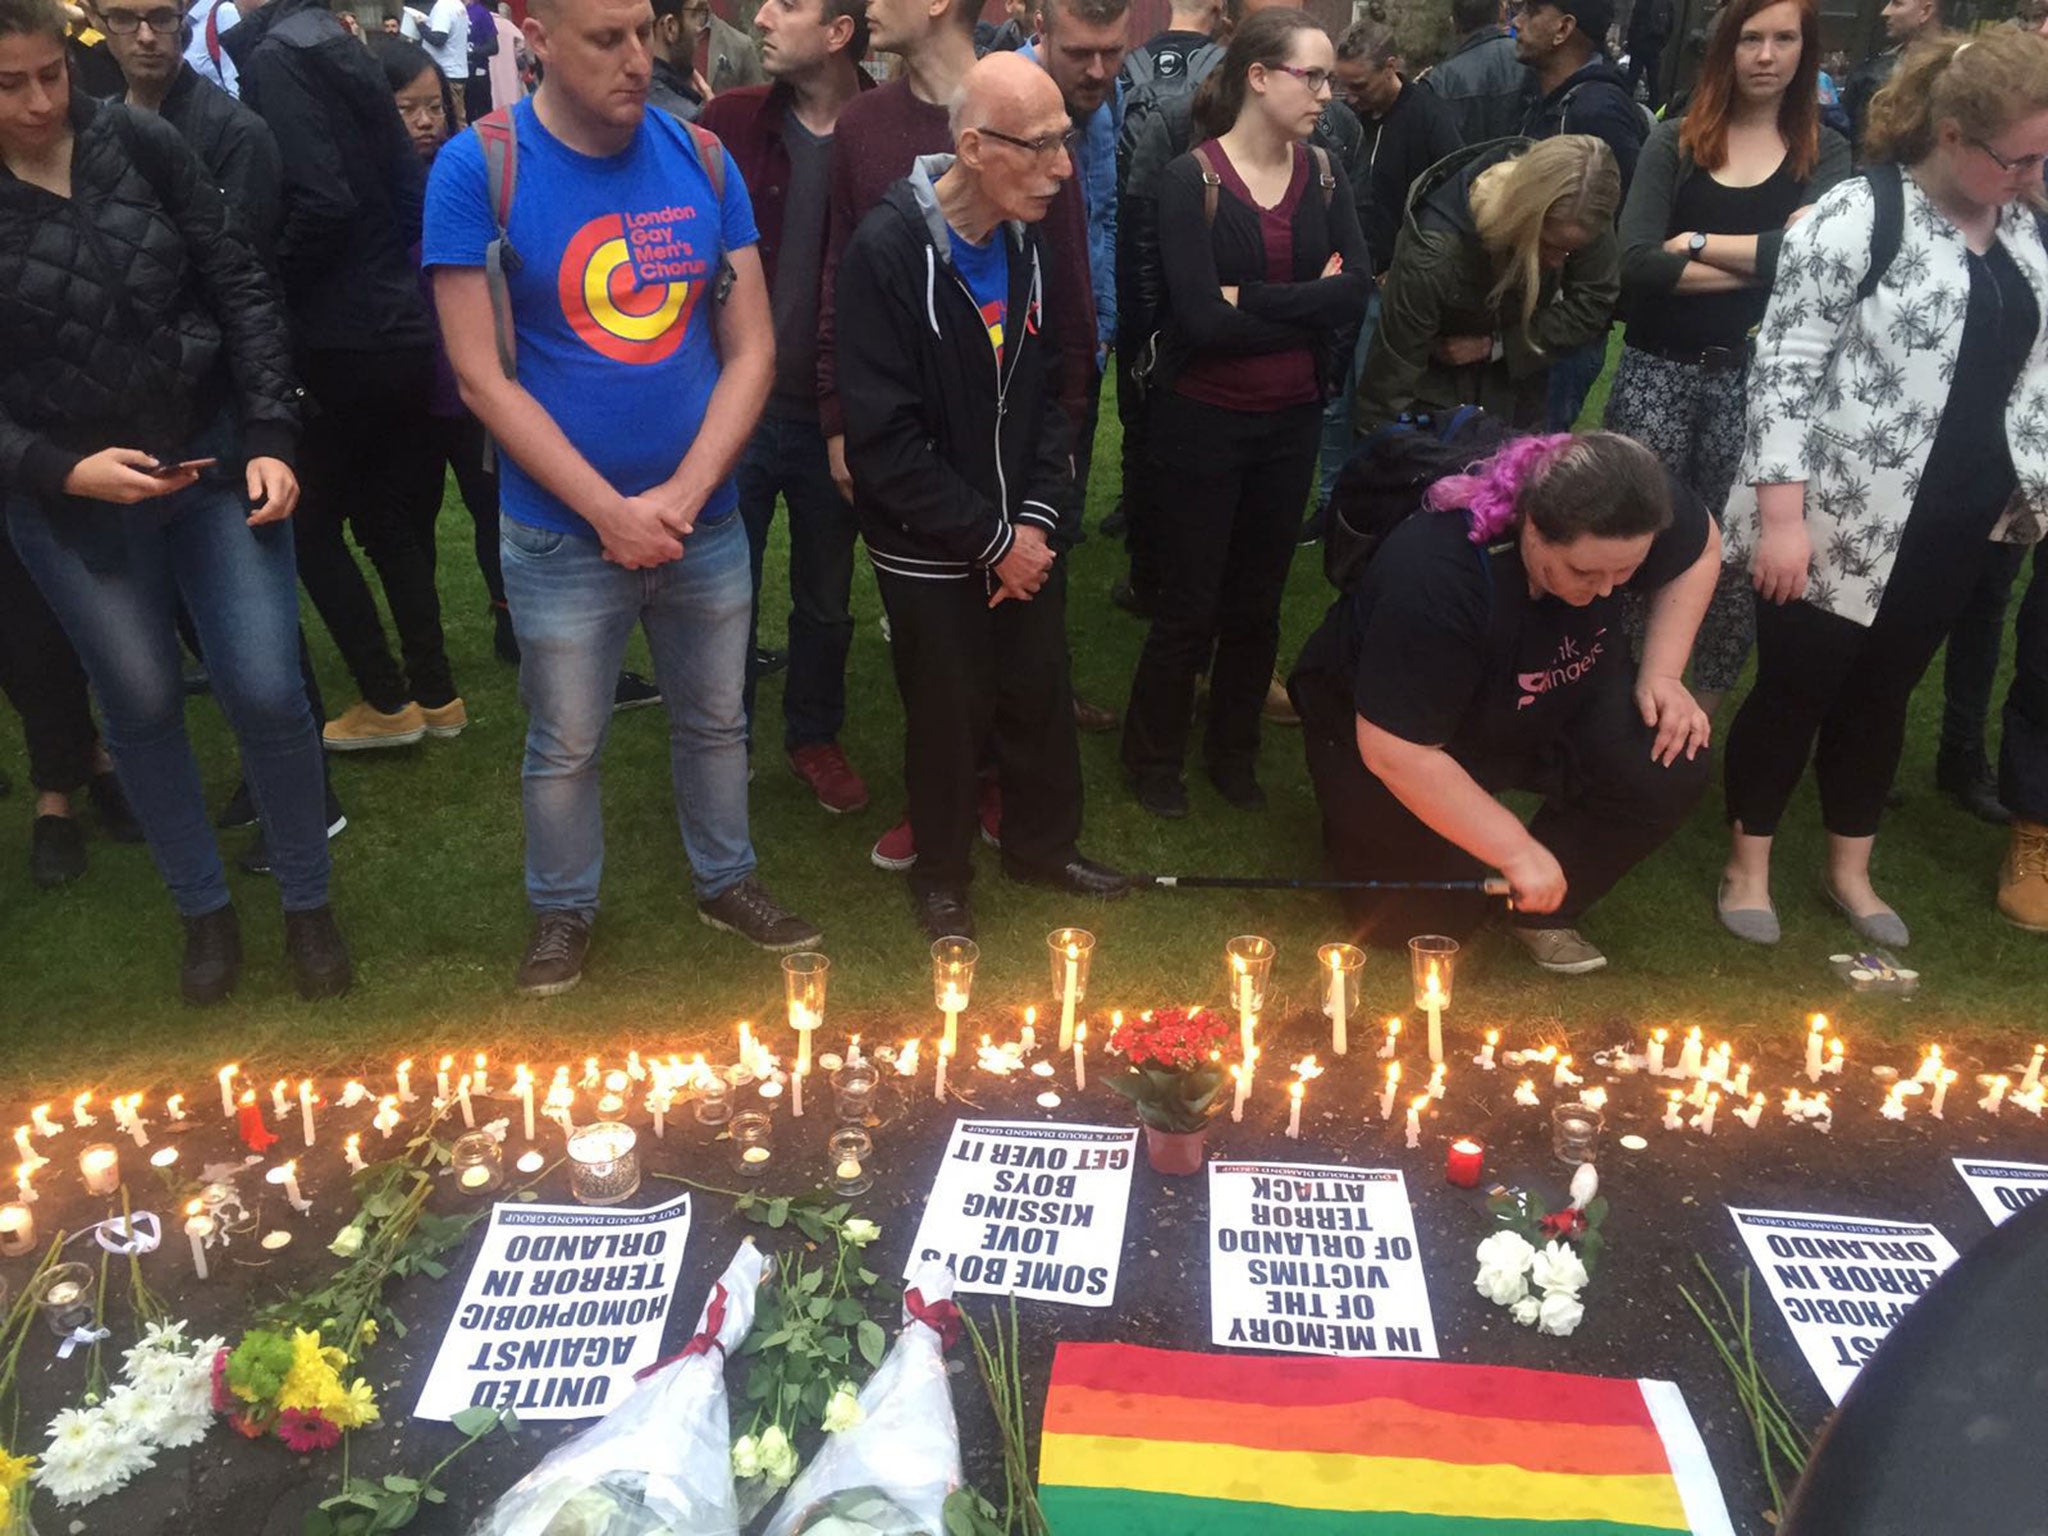 There's were two minutes' silence for Orlando. Later songs were sung